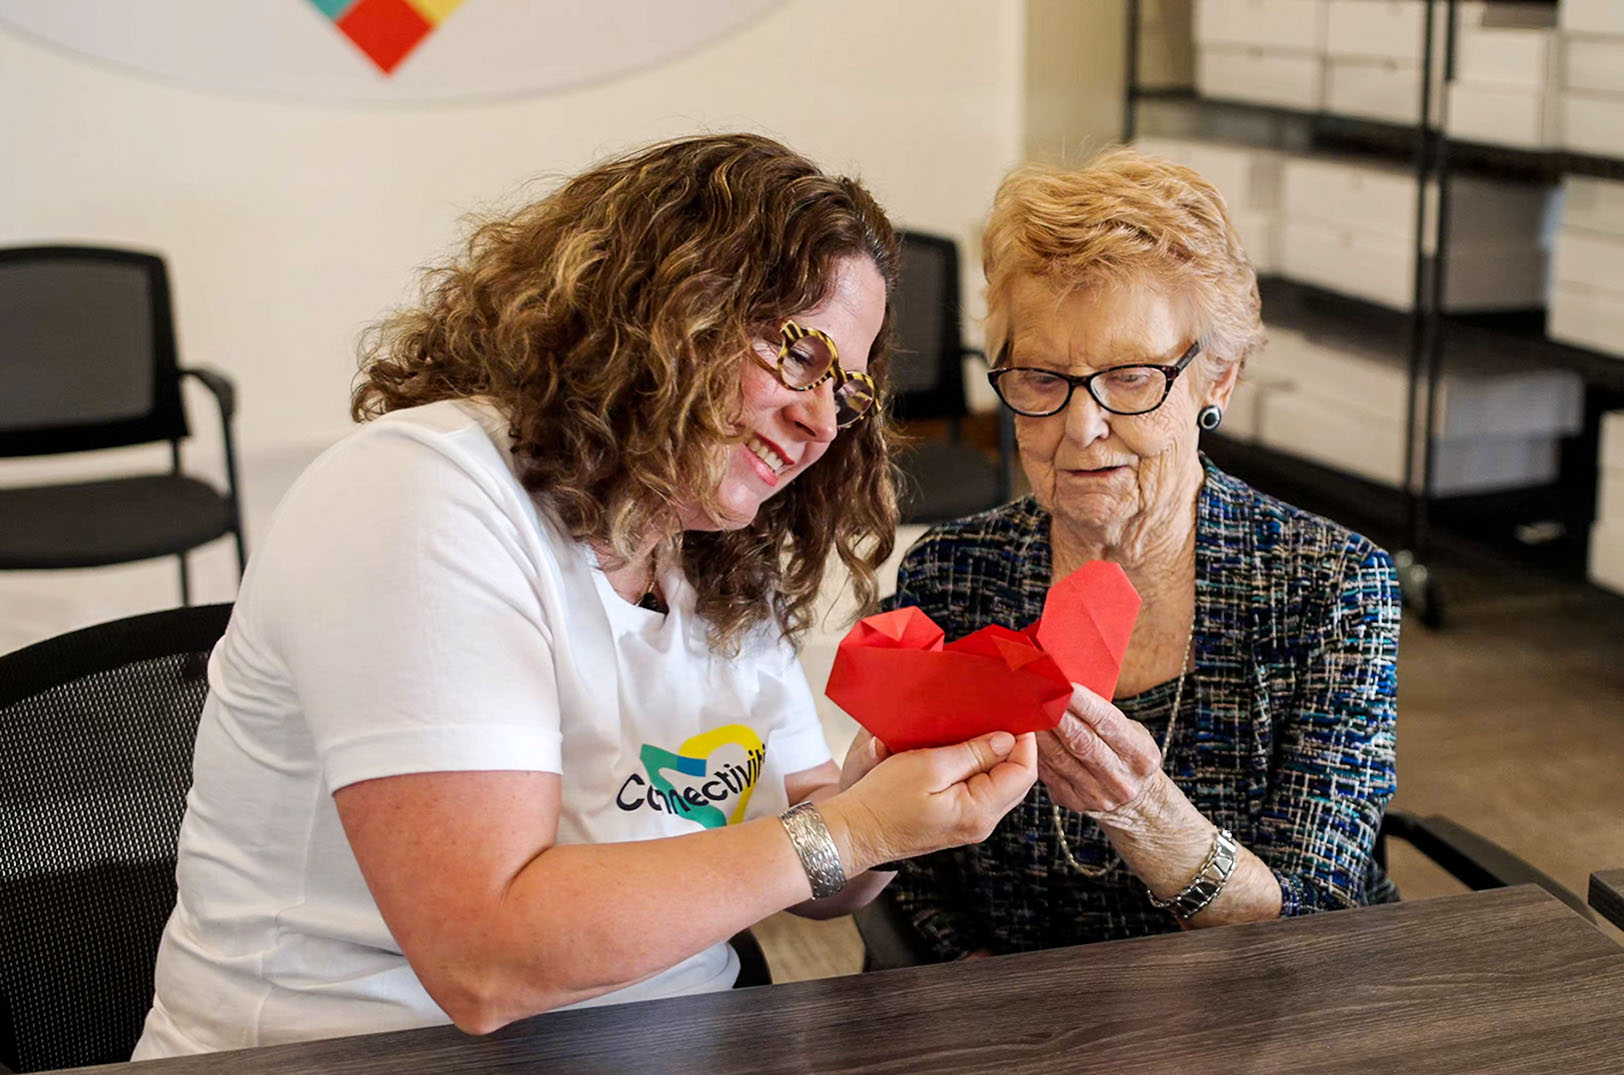 Inside-the-box thinking: Veteran entrepreneurs craft memory care tools to engage dementia patients